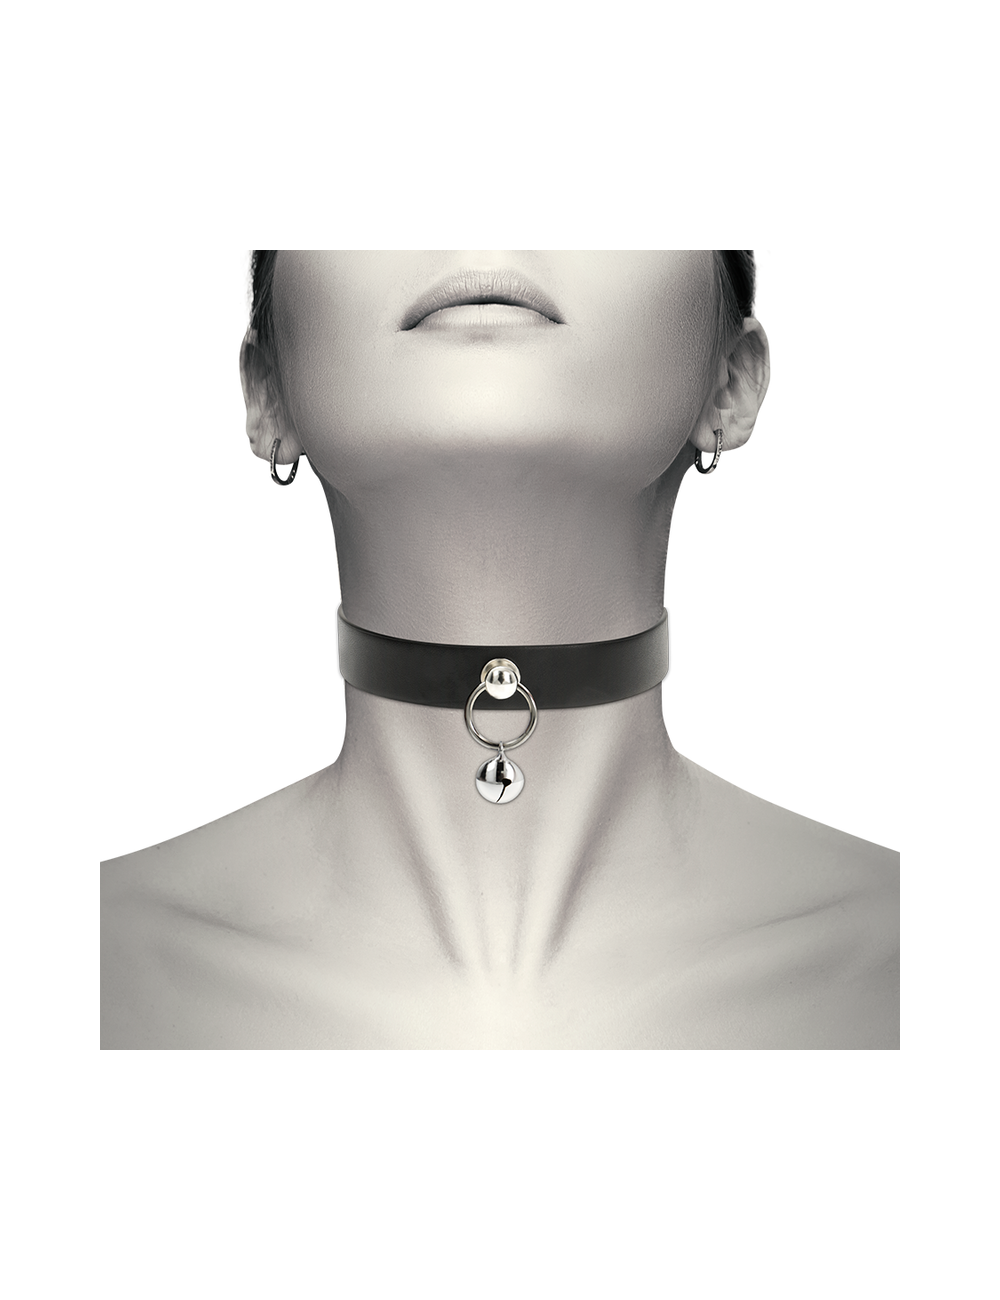 COQUETTE CHIC DESIRE HAND CRAFTED CHOKER JINGLE BELL